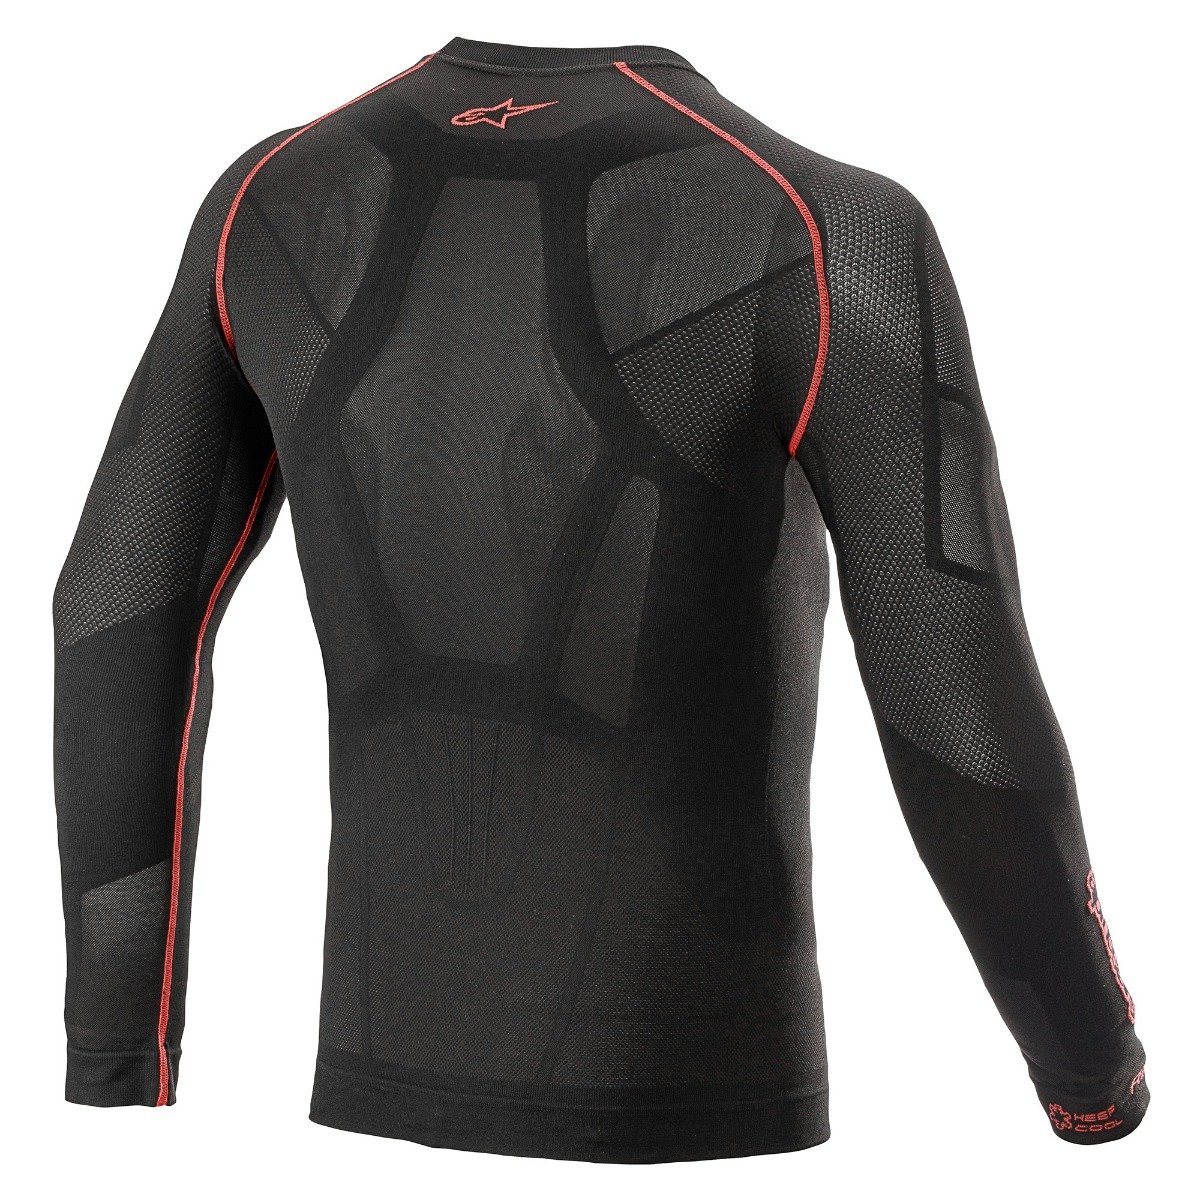 Image of Alpinestars Ride Tech V2 Top Long Sleeve Black Red Summer Size XS-S ID 8059175286667